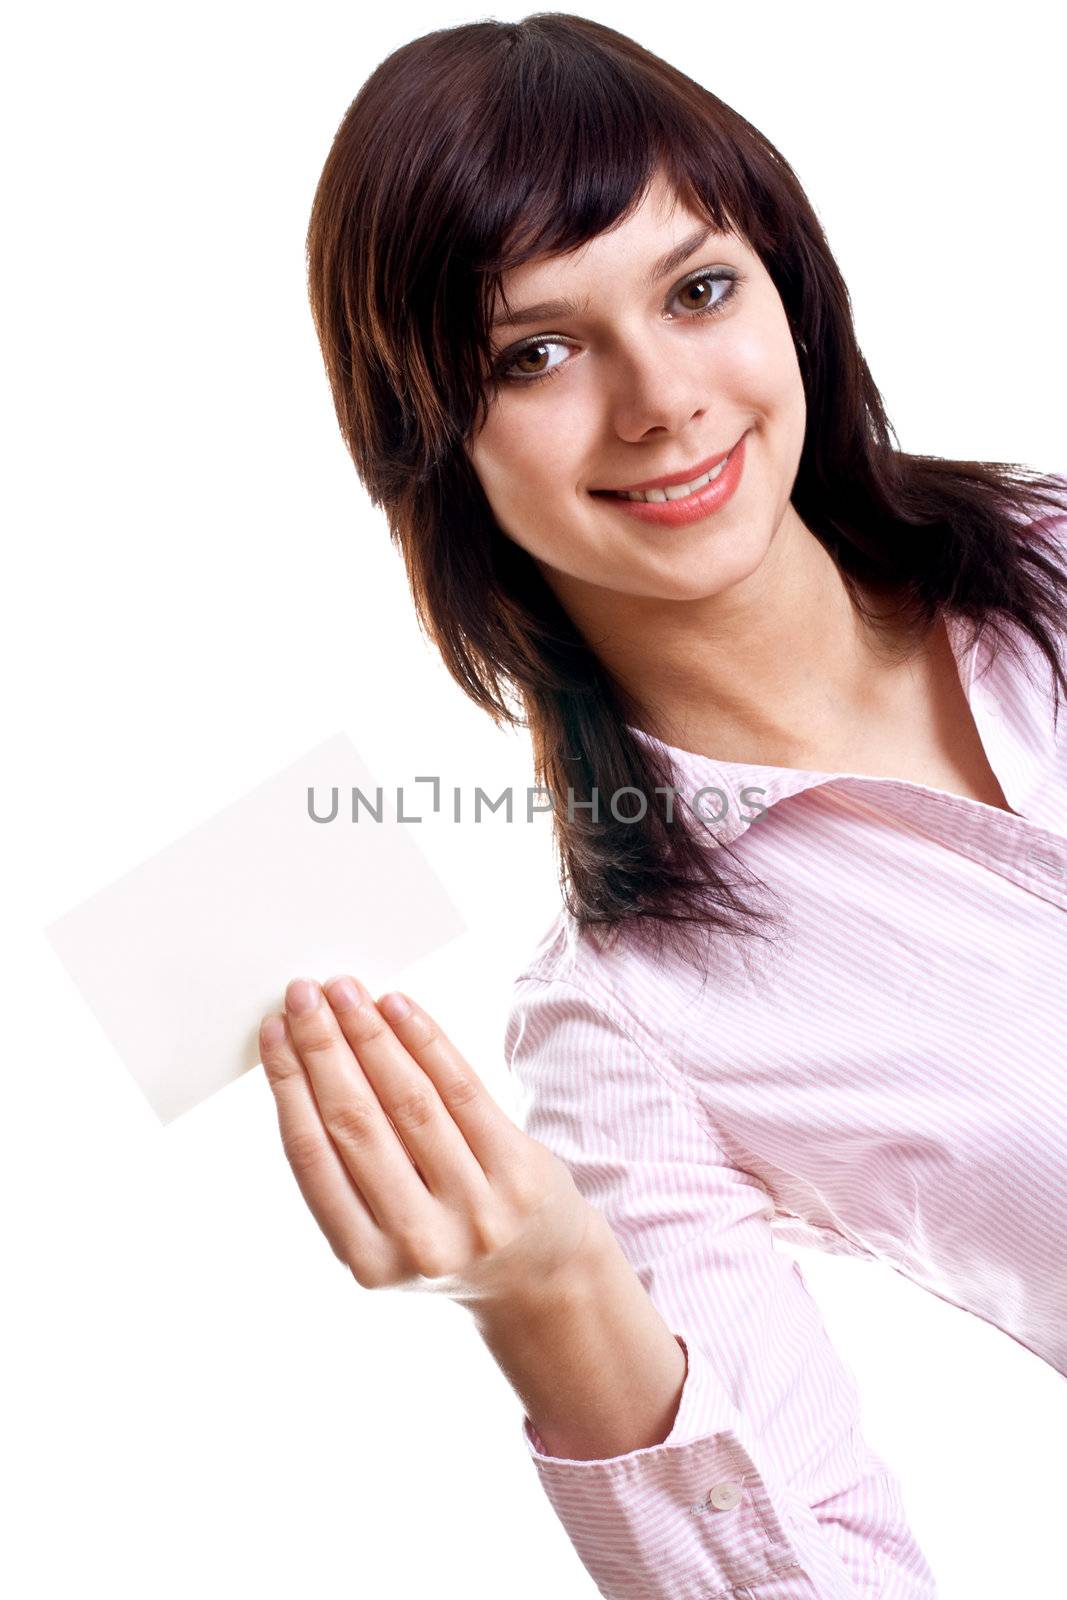 young woman with business card on a white background